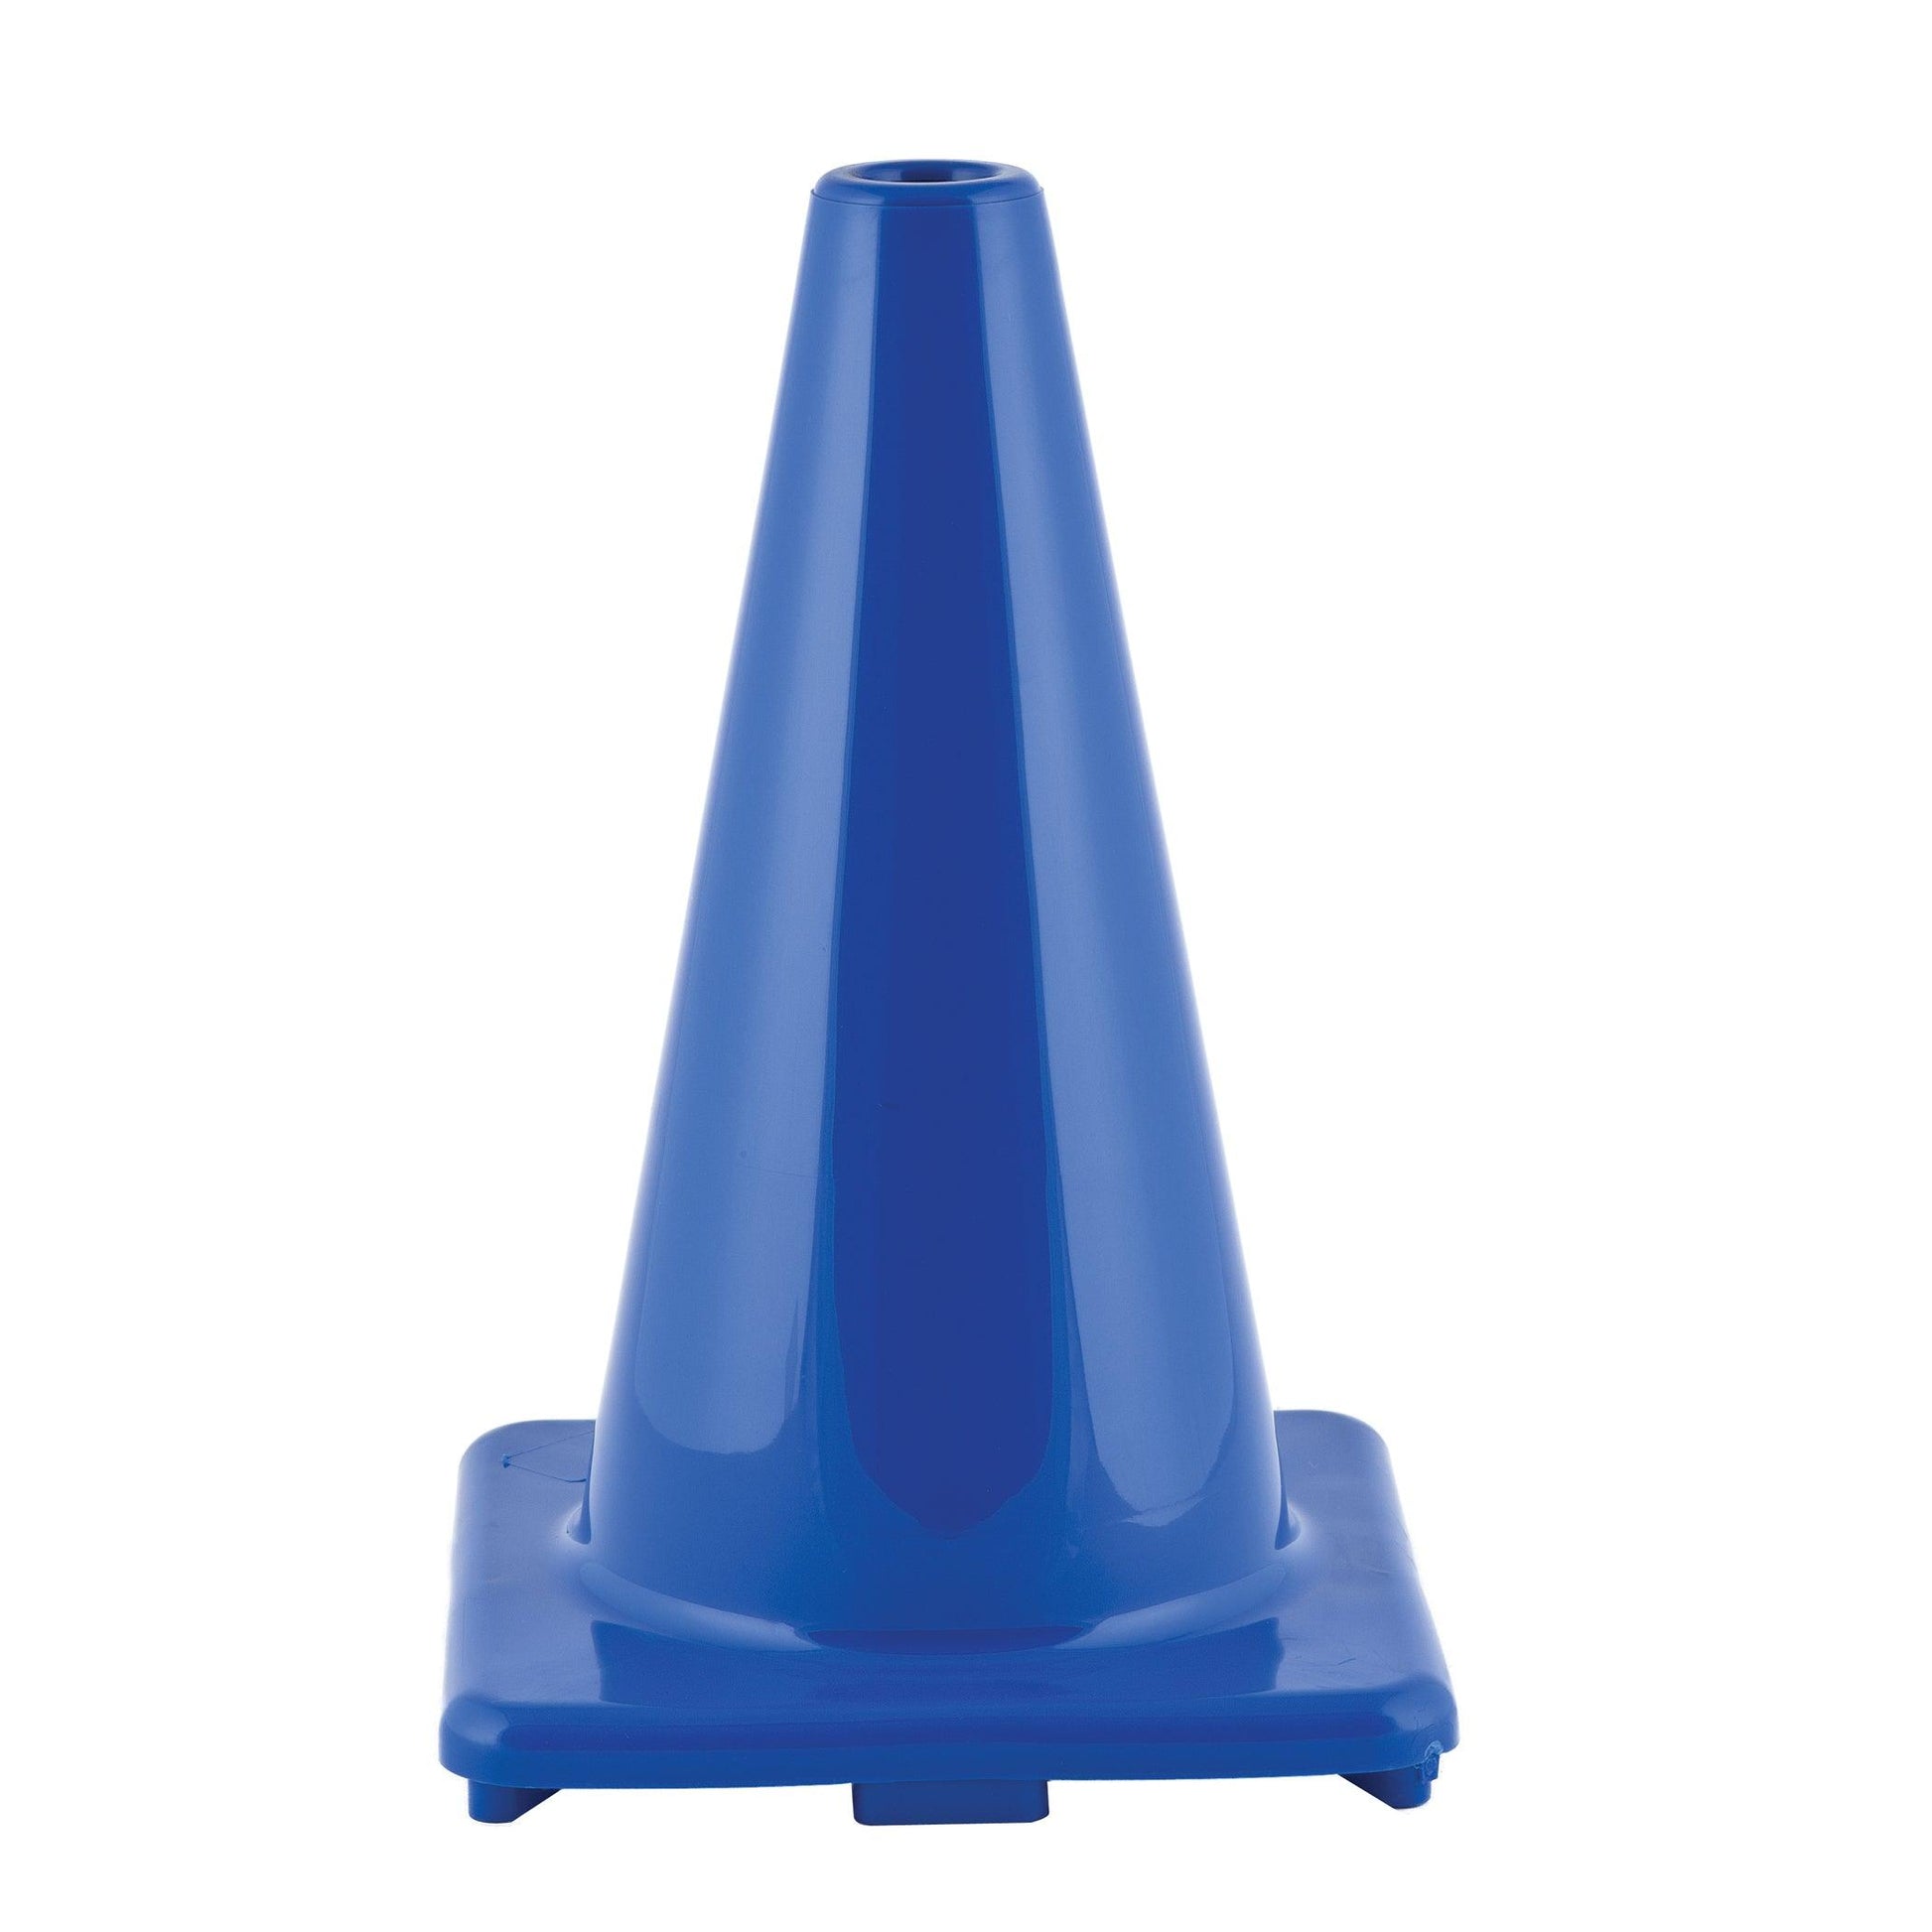 Hi-Visibility Flexible Vinyl Cone, weighted, 12", Royal Blue - Loomini